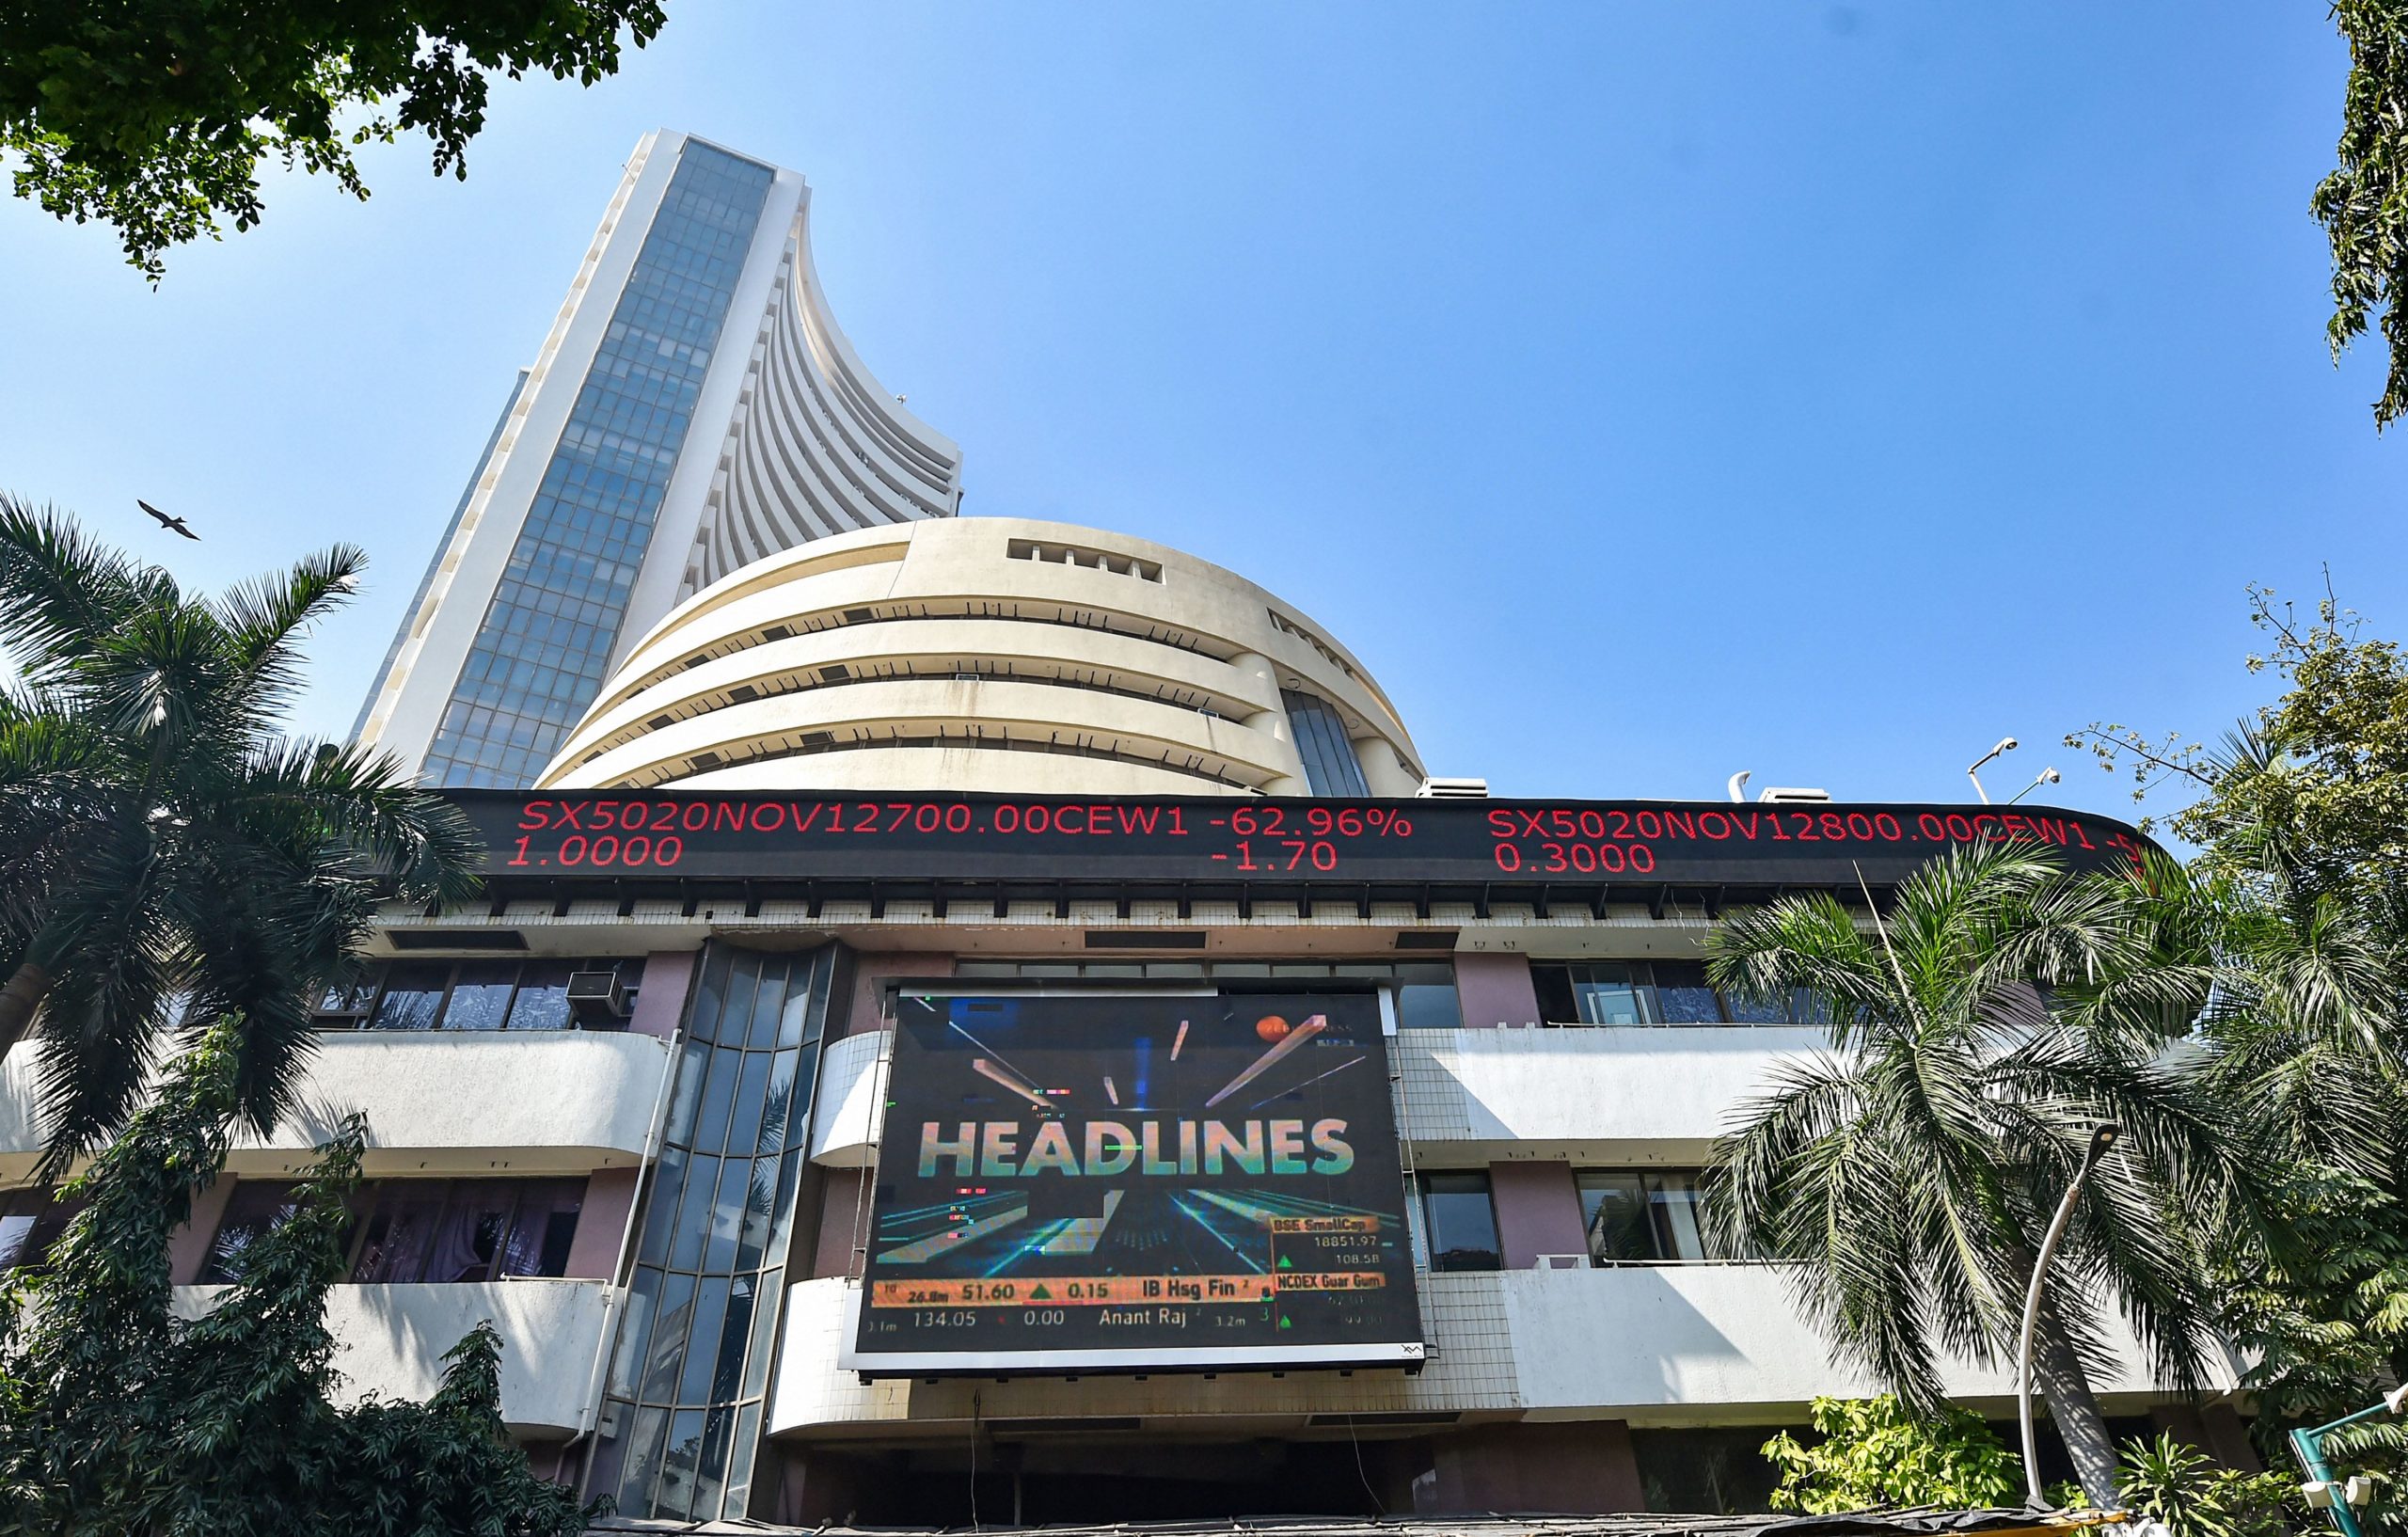 Trending Stocks: HDFC, Airtel, Tech Mahindra and others in news today